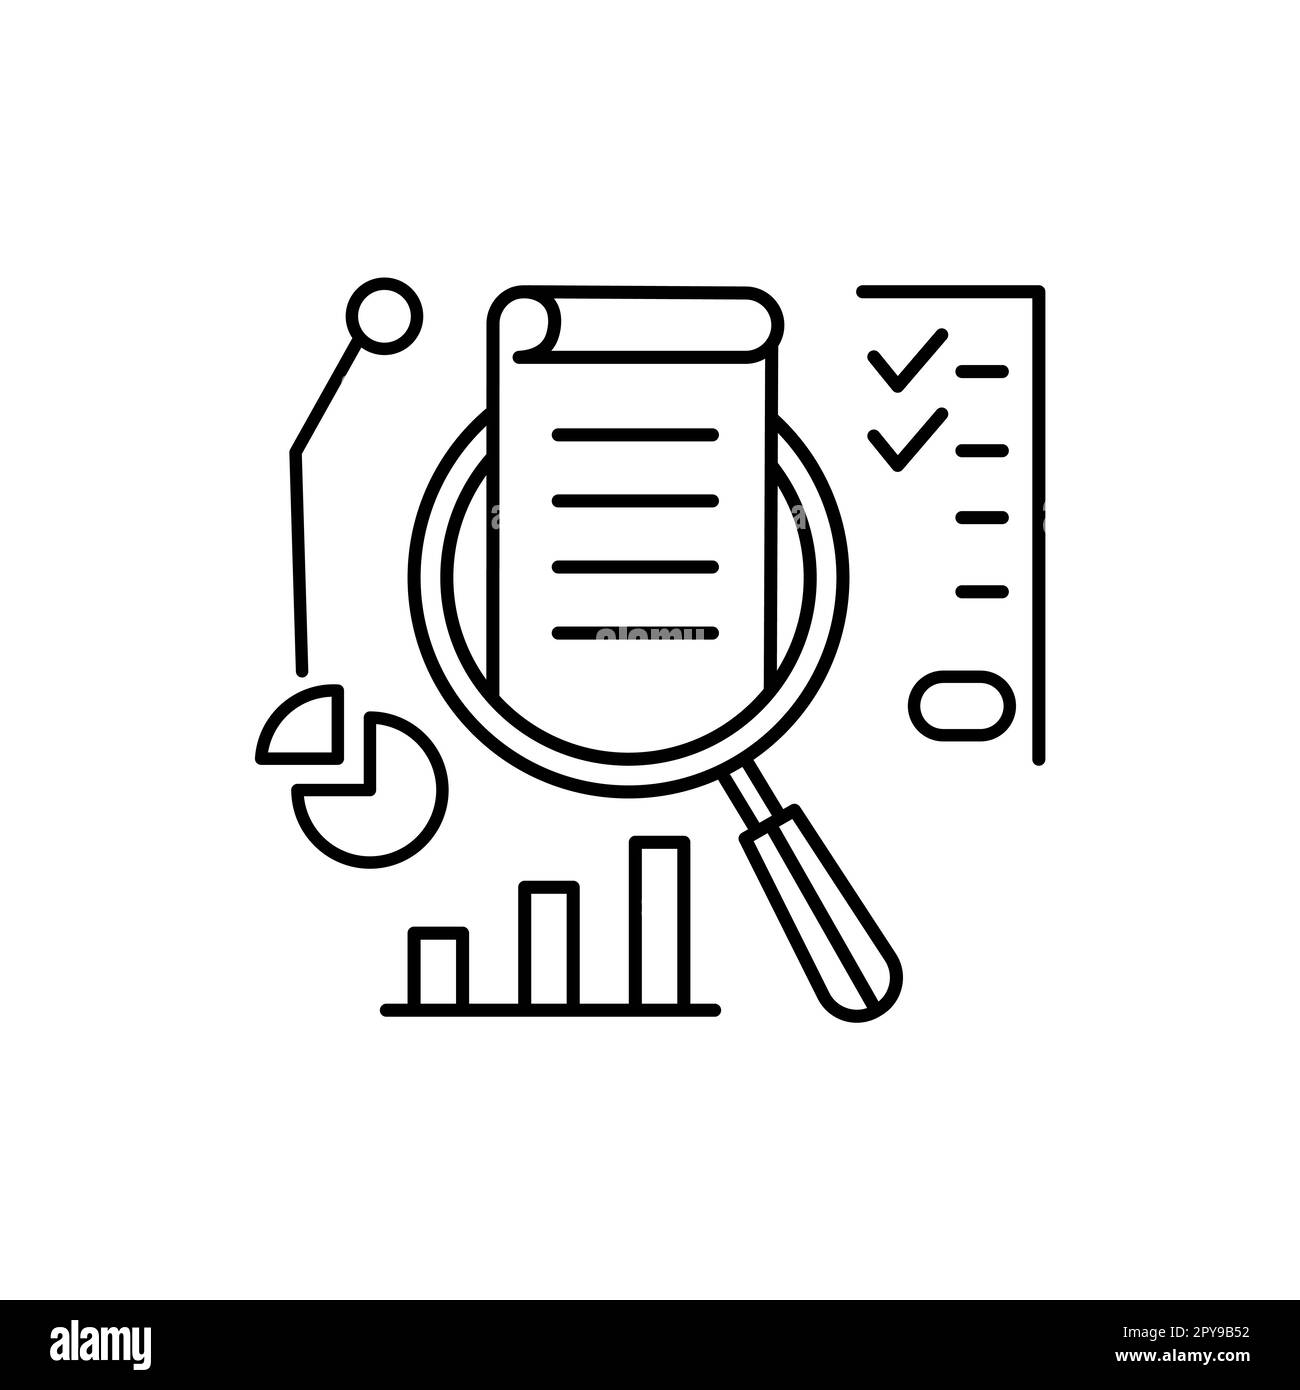 Study overview or regulatory icon with thin line magnifier. flat trend lineart simple exam logotype stroke art design web element isolated on white Stock Vector